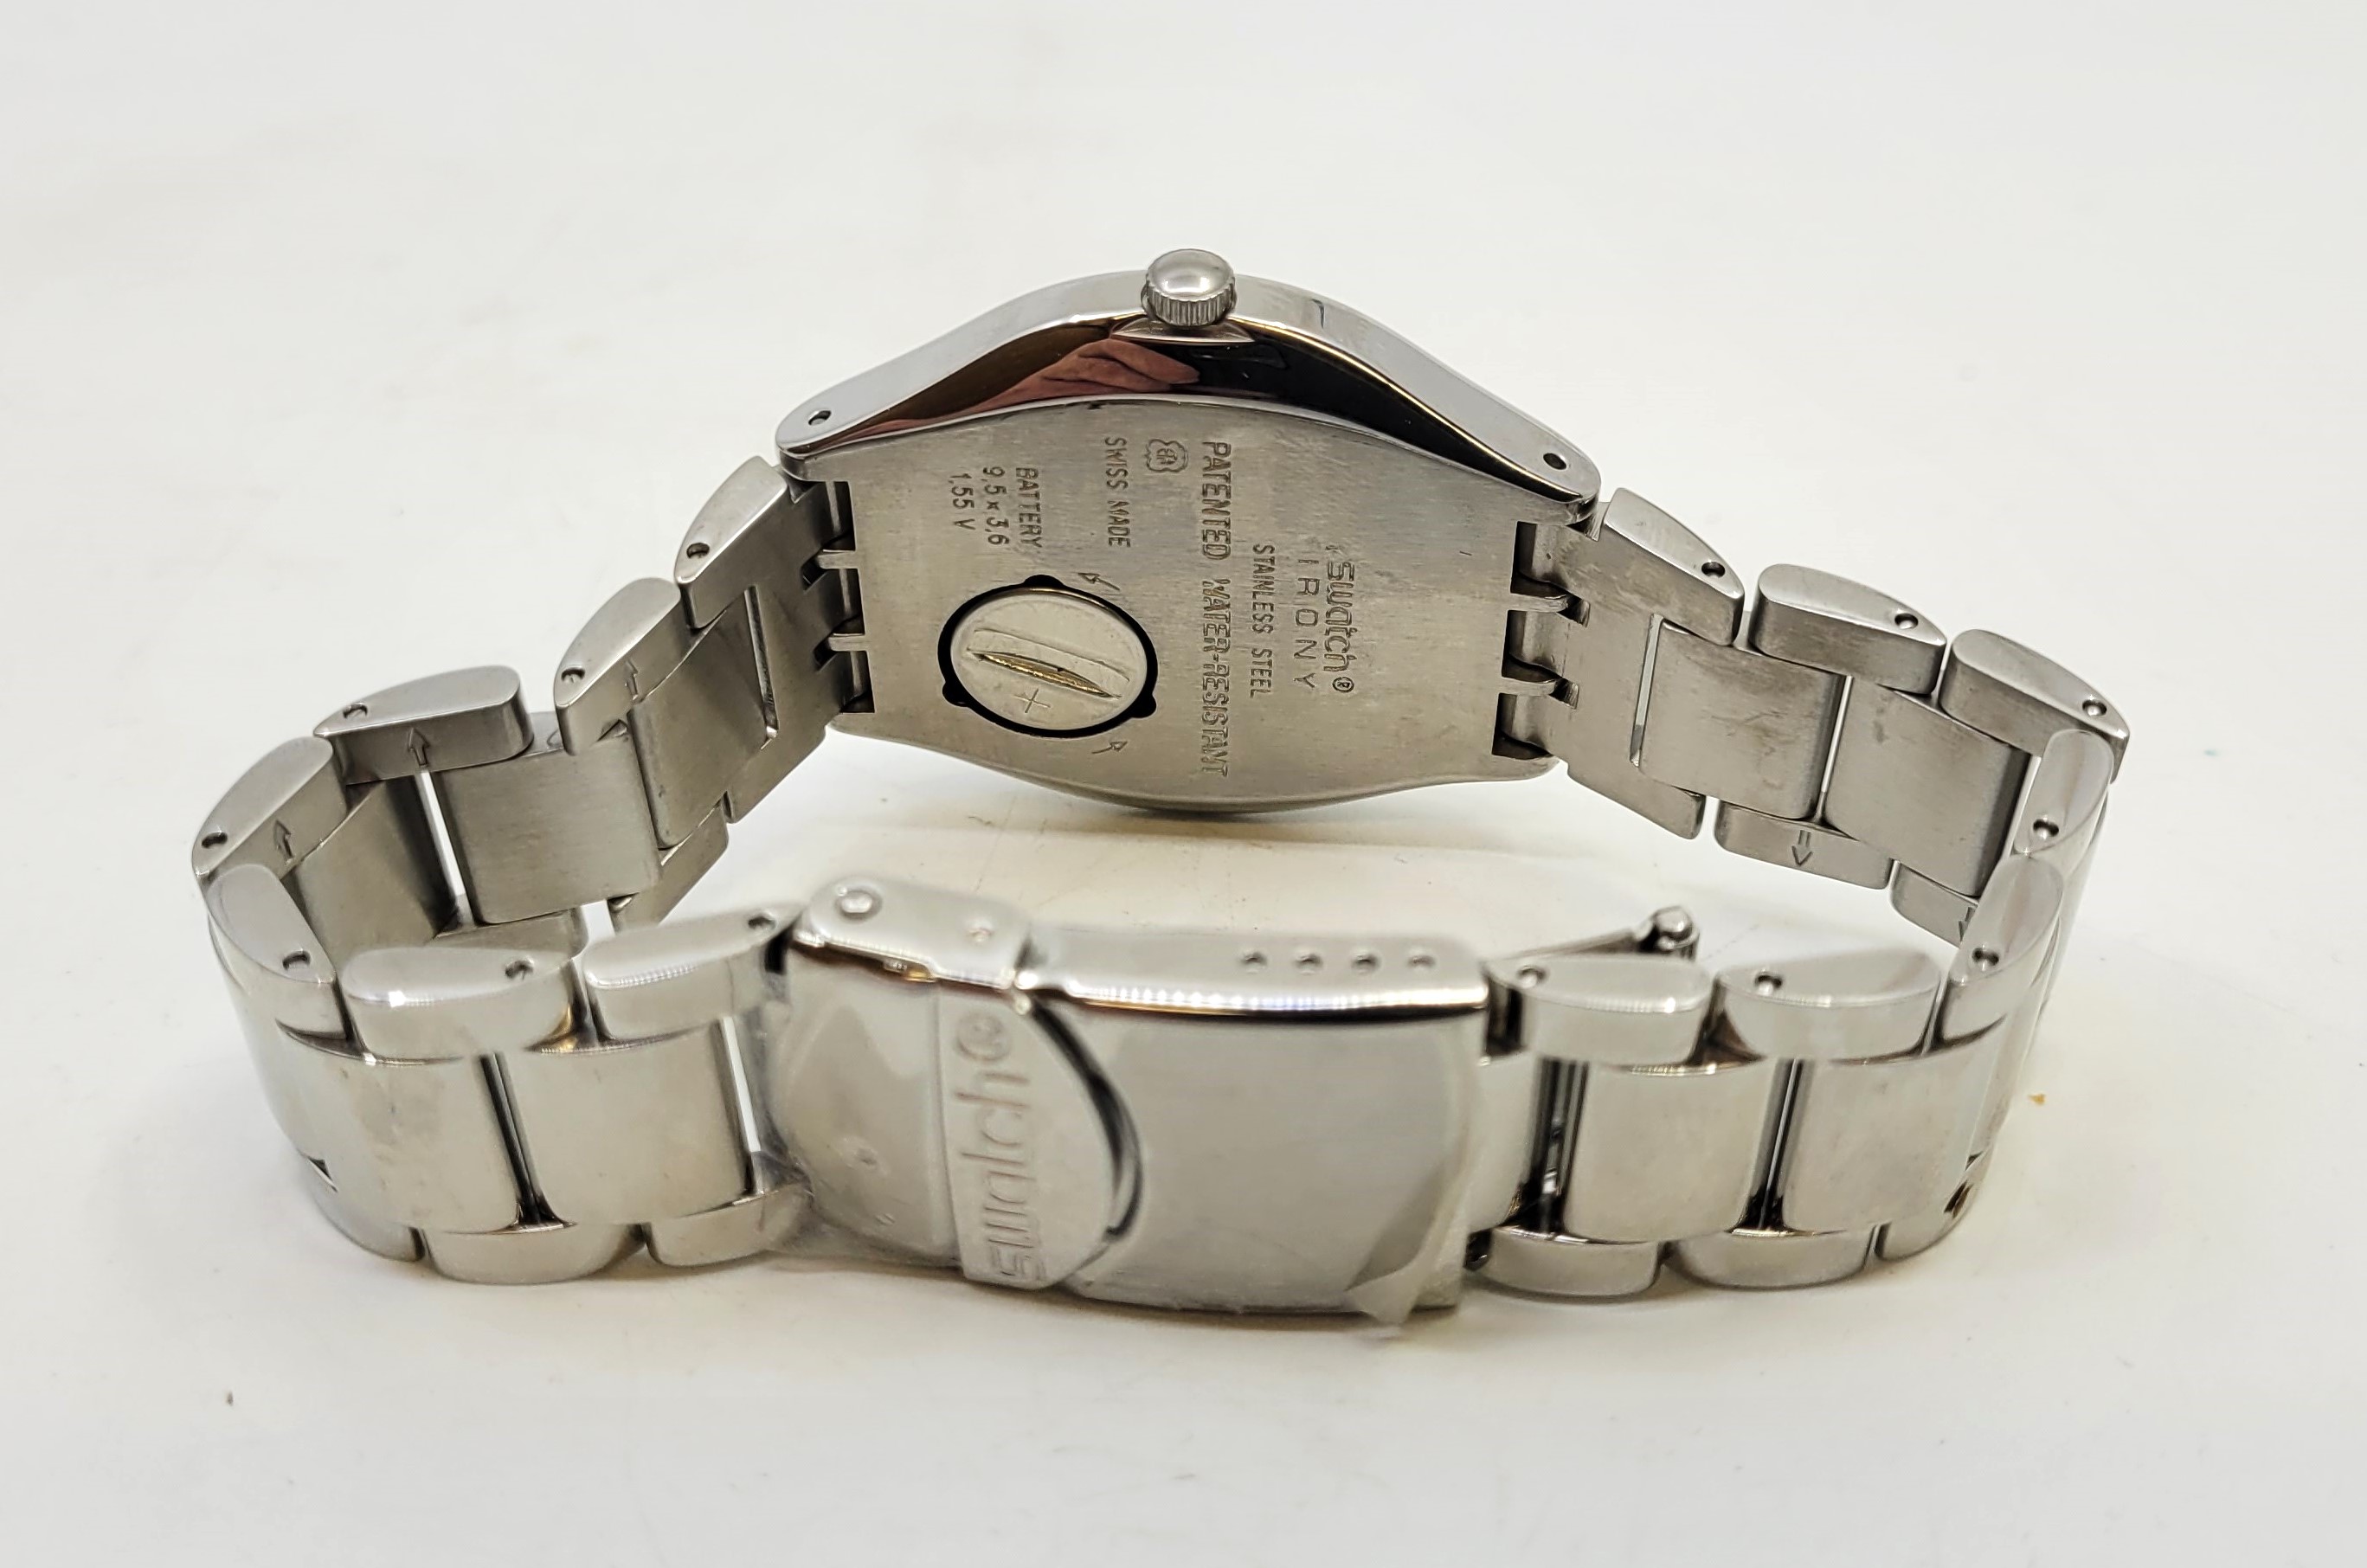 A Swatch Irony stainless steel quartz bracelet watch, unused in original box with papers, together - Image 9 of 18